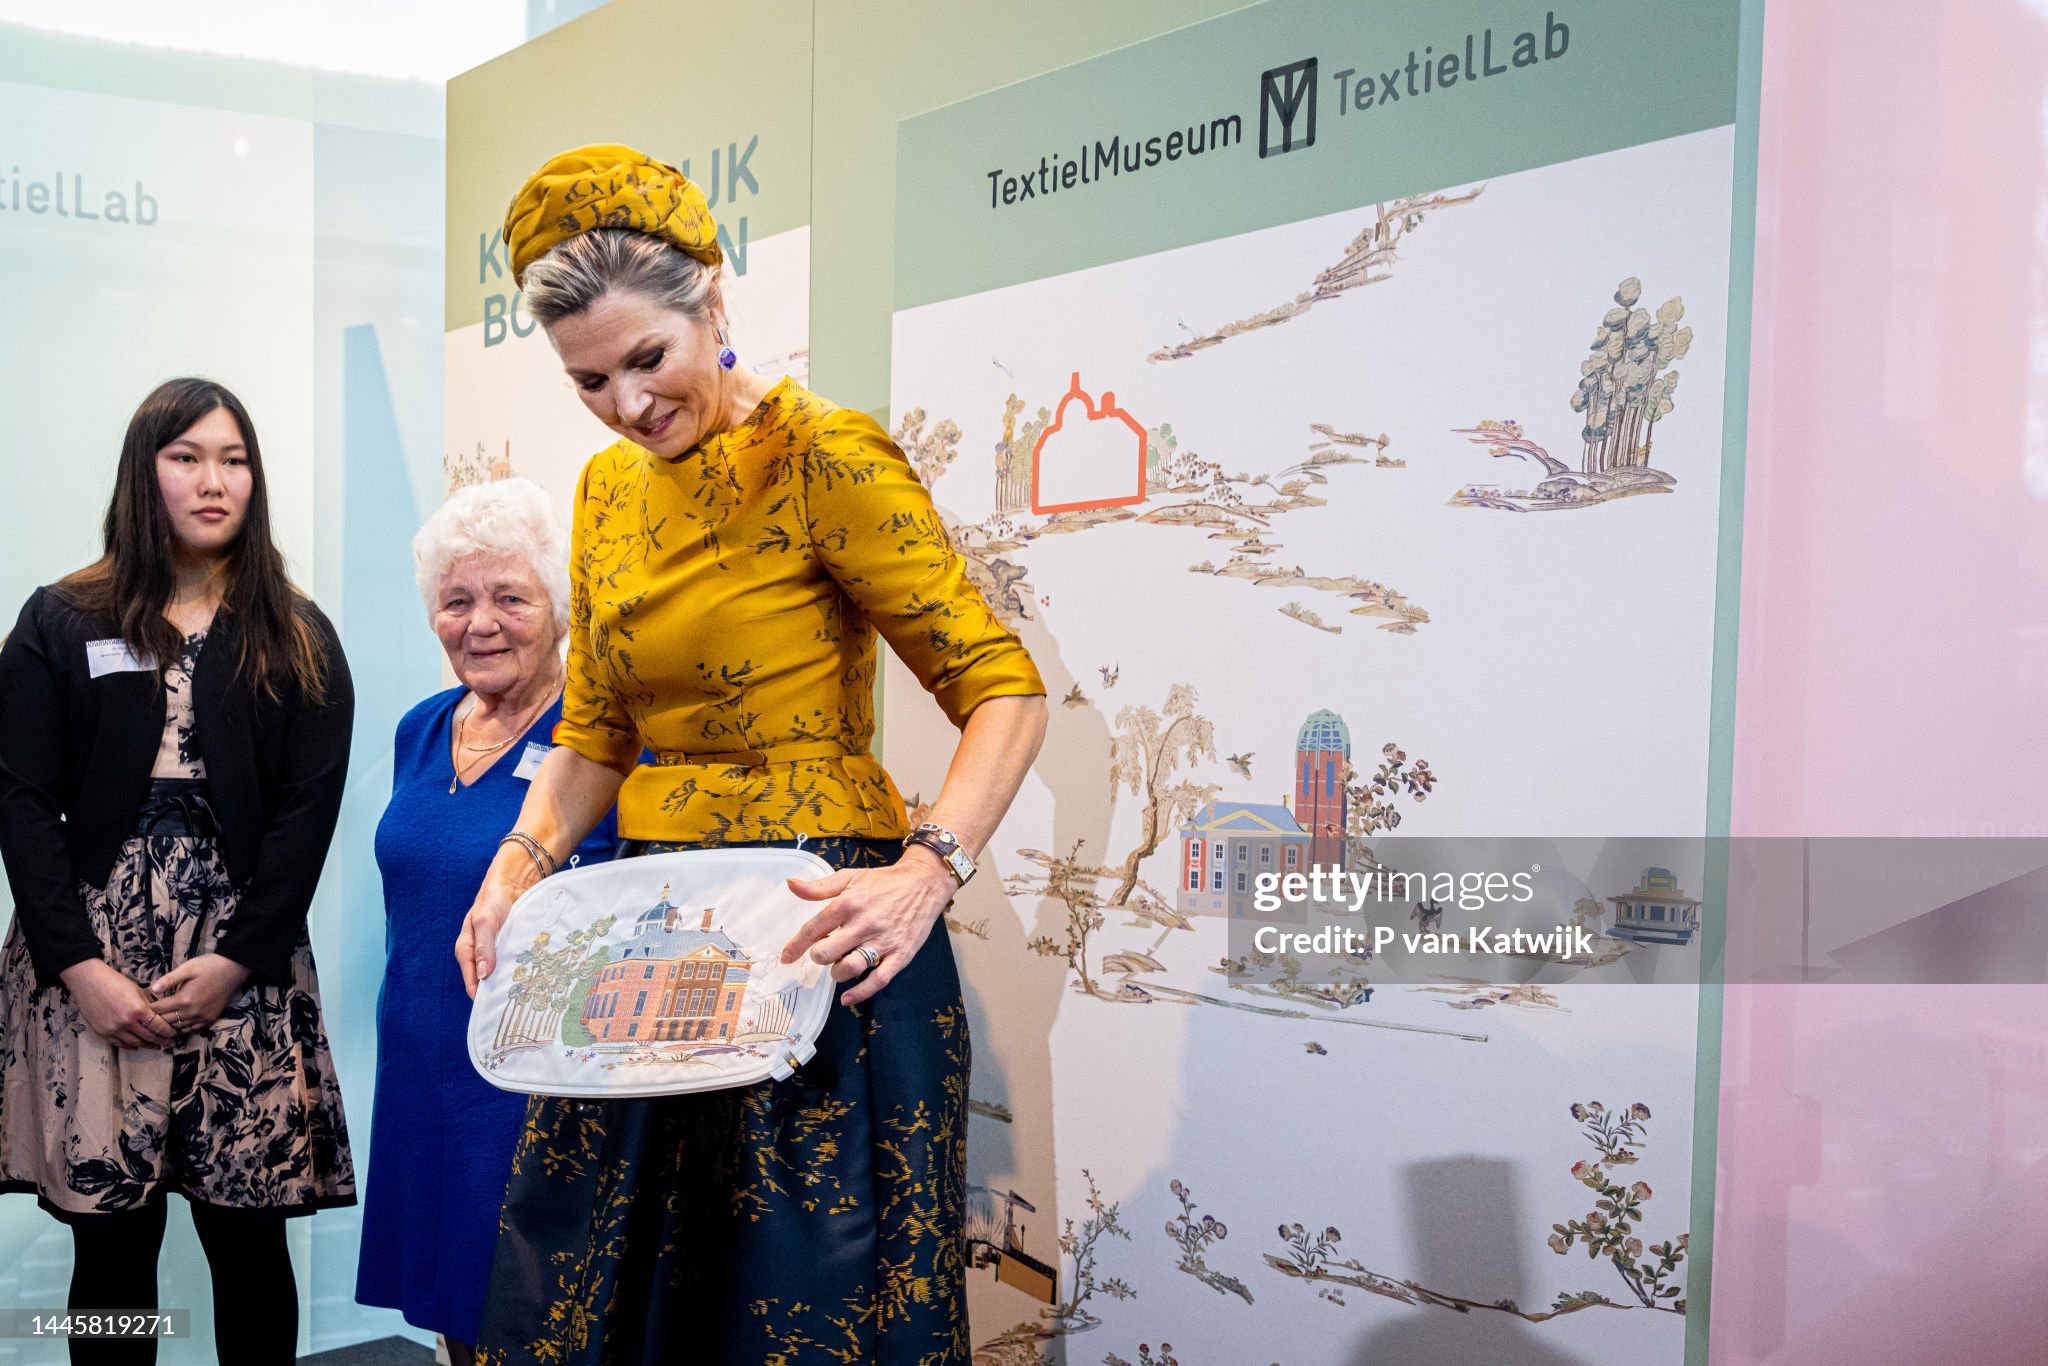 queen-maxima-of-the-netherlands-visits-textile-museum-to-present-her-new-curtains-for-palace.jpg?s=2048x2048&w=gi&k=20&c=VY5cU6jshB79LyiB3yqL1yrhNlW_jJcPx3QuJfh47I8=